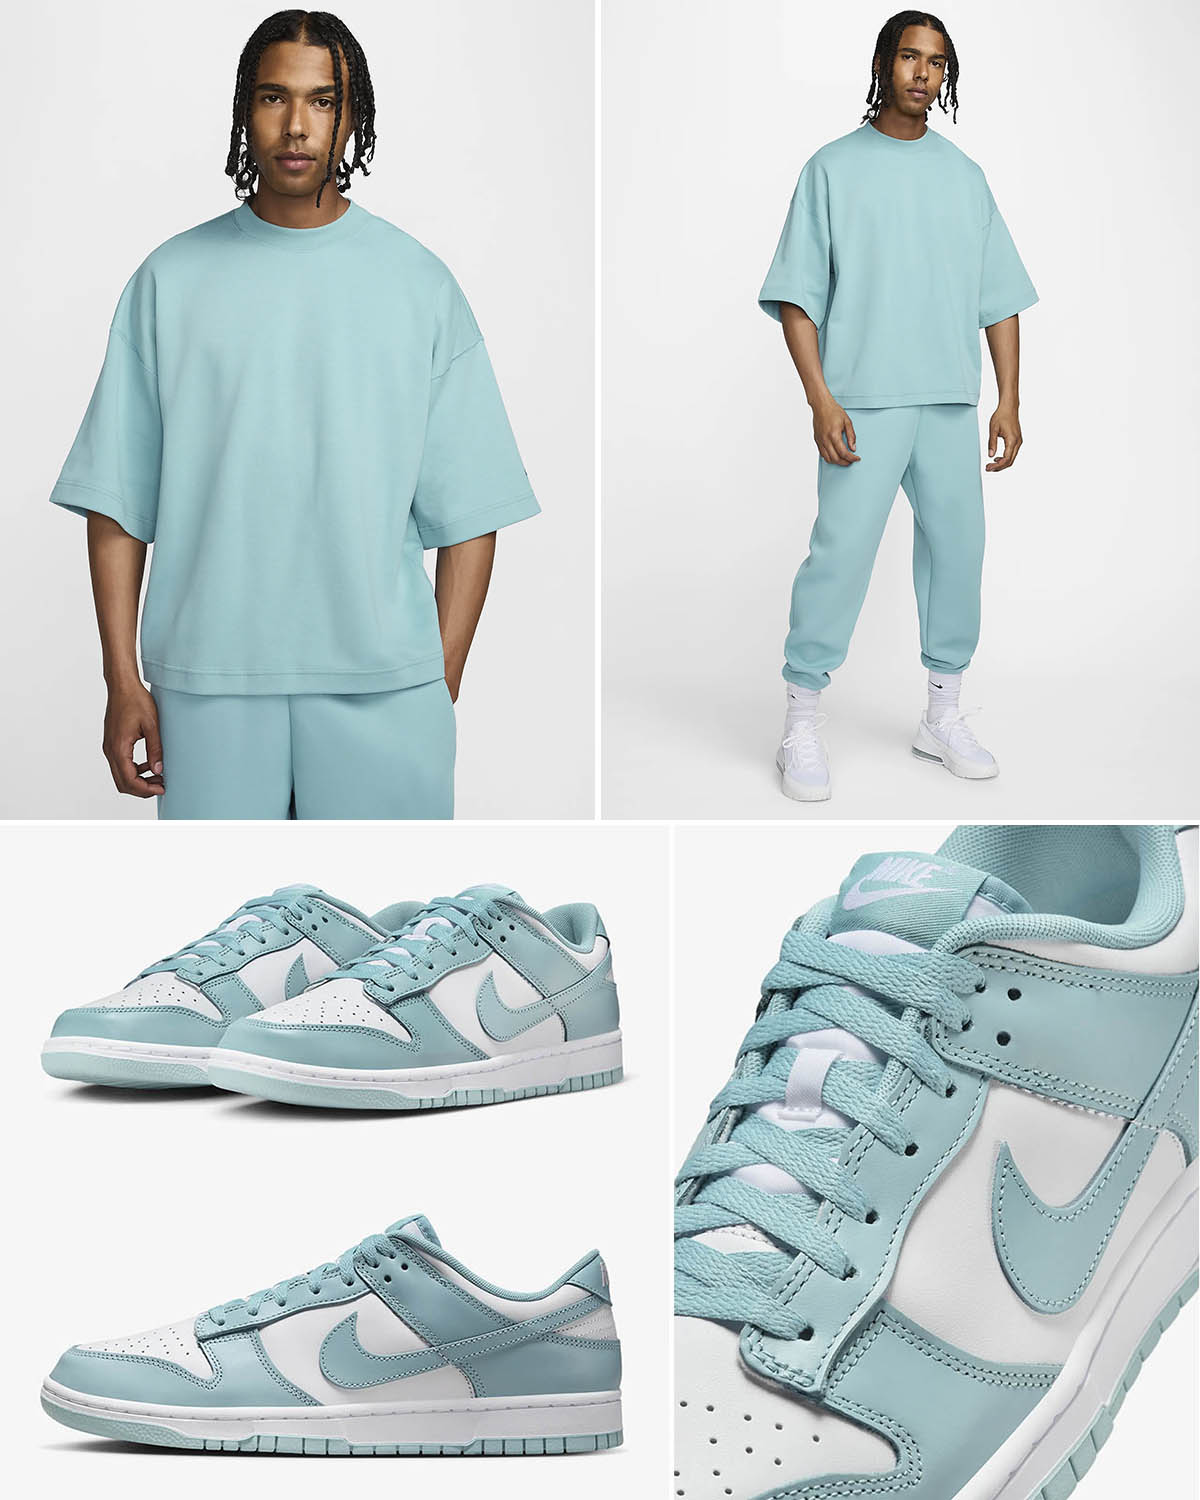 Nike Dunk Low Denim Turquoise Outfits